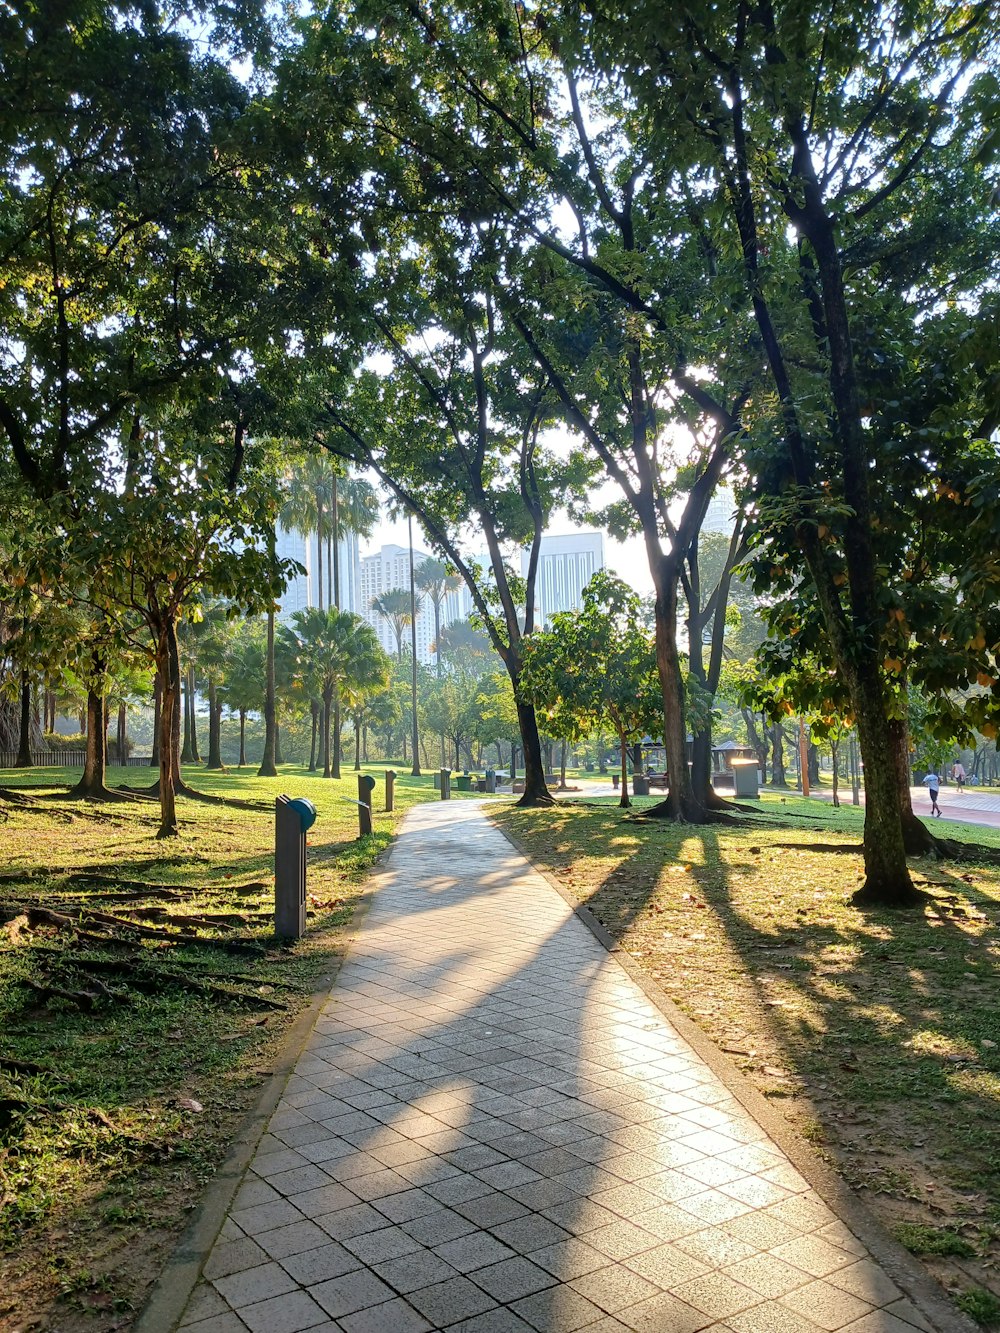 a pathway in a park with trees and grass